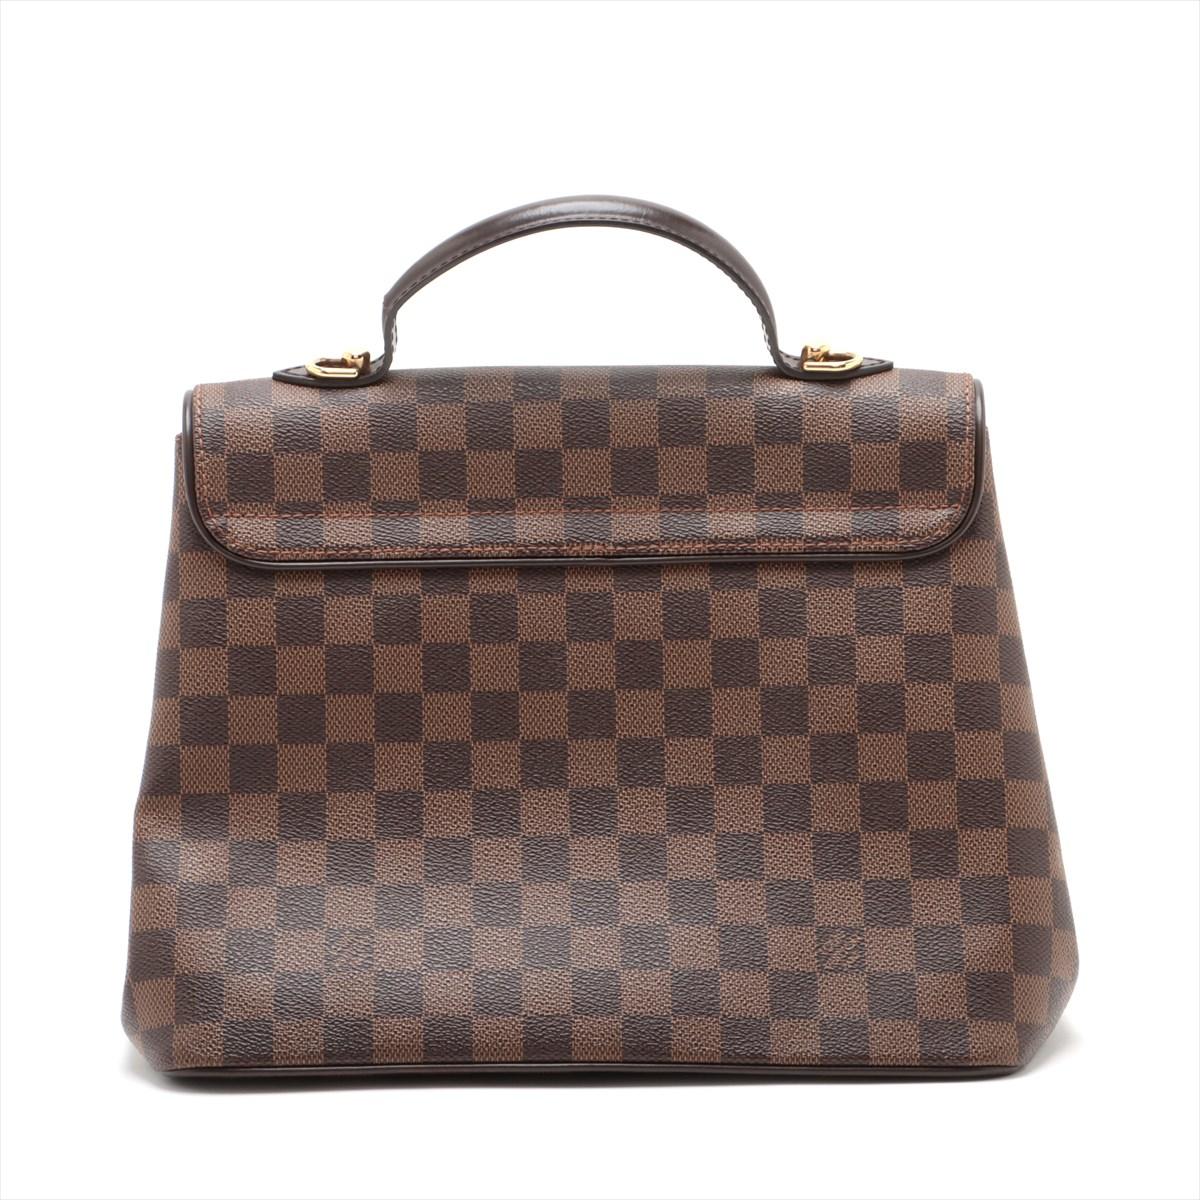 Louis Vuitton Damier Ebene Bergamo MM In Good Condition For Sale In Indianapolis, IN